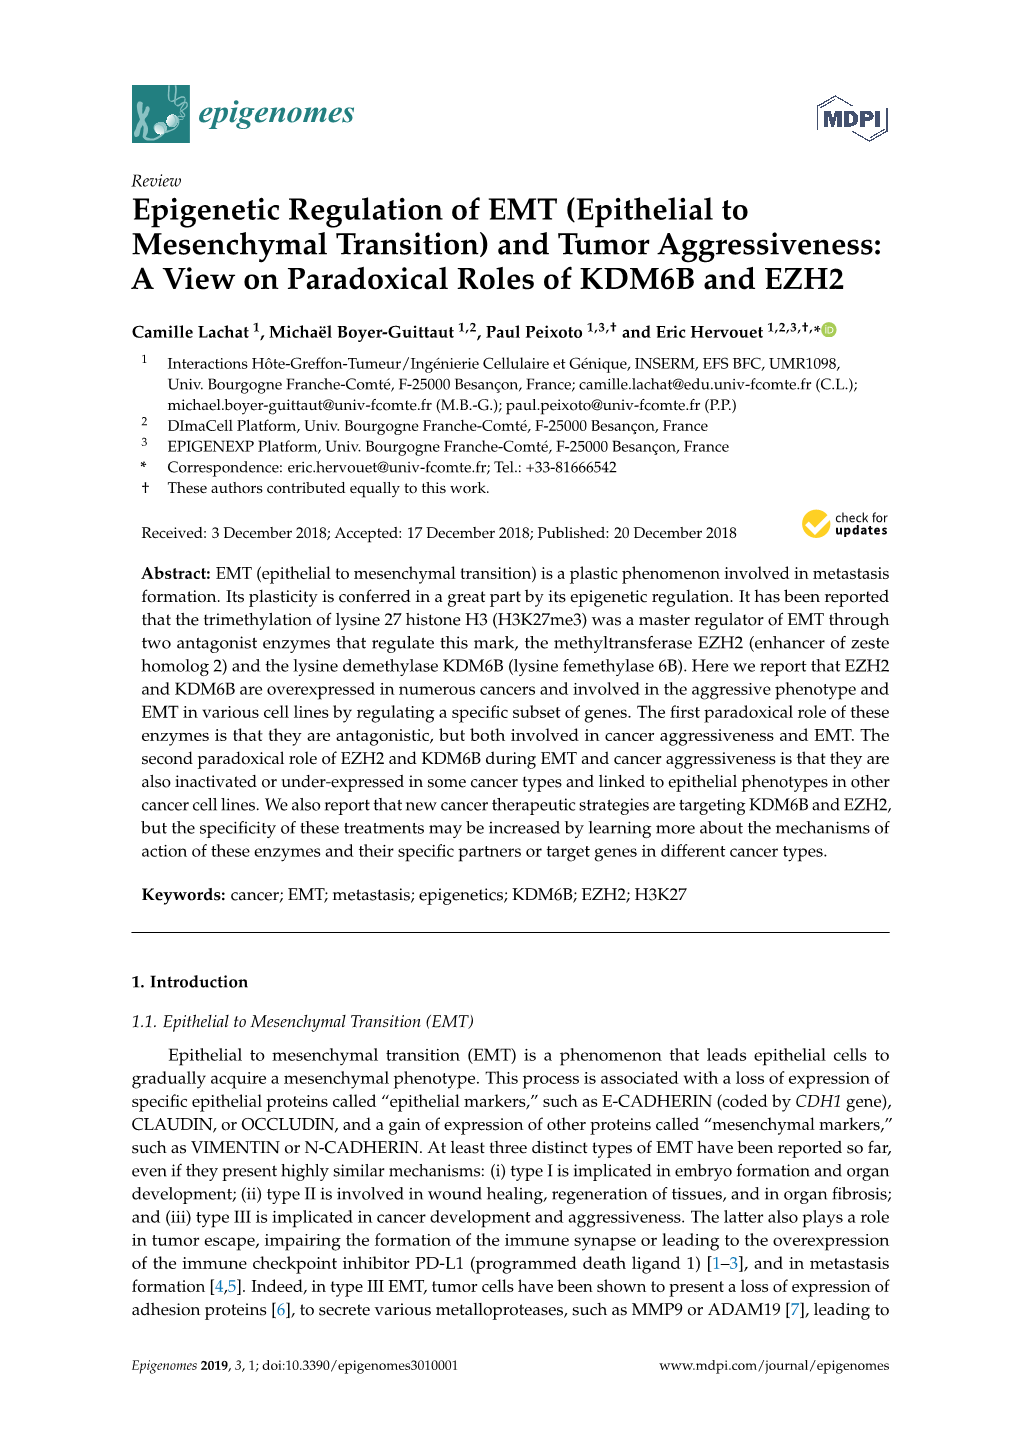 Epigenetic Regulation of EMT (Epithelial to Mesenchymal Transition) and Tumor Aggressiveness: a View on Paradoxical Roles of KDM6B and EZH2